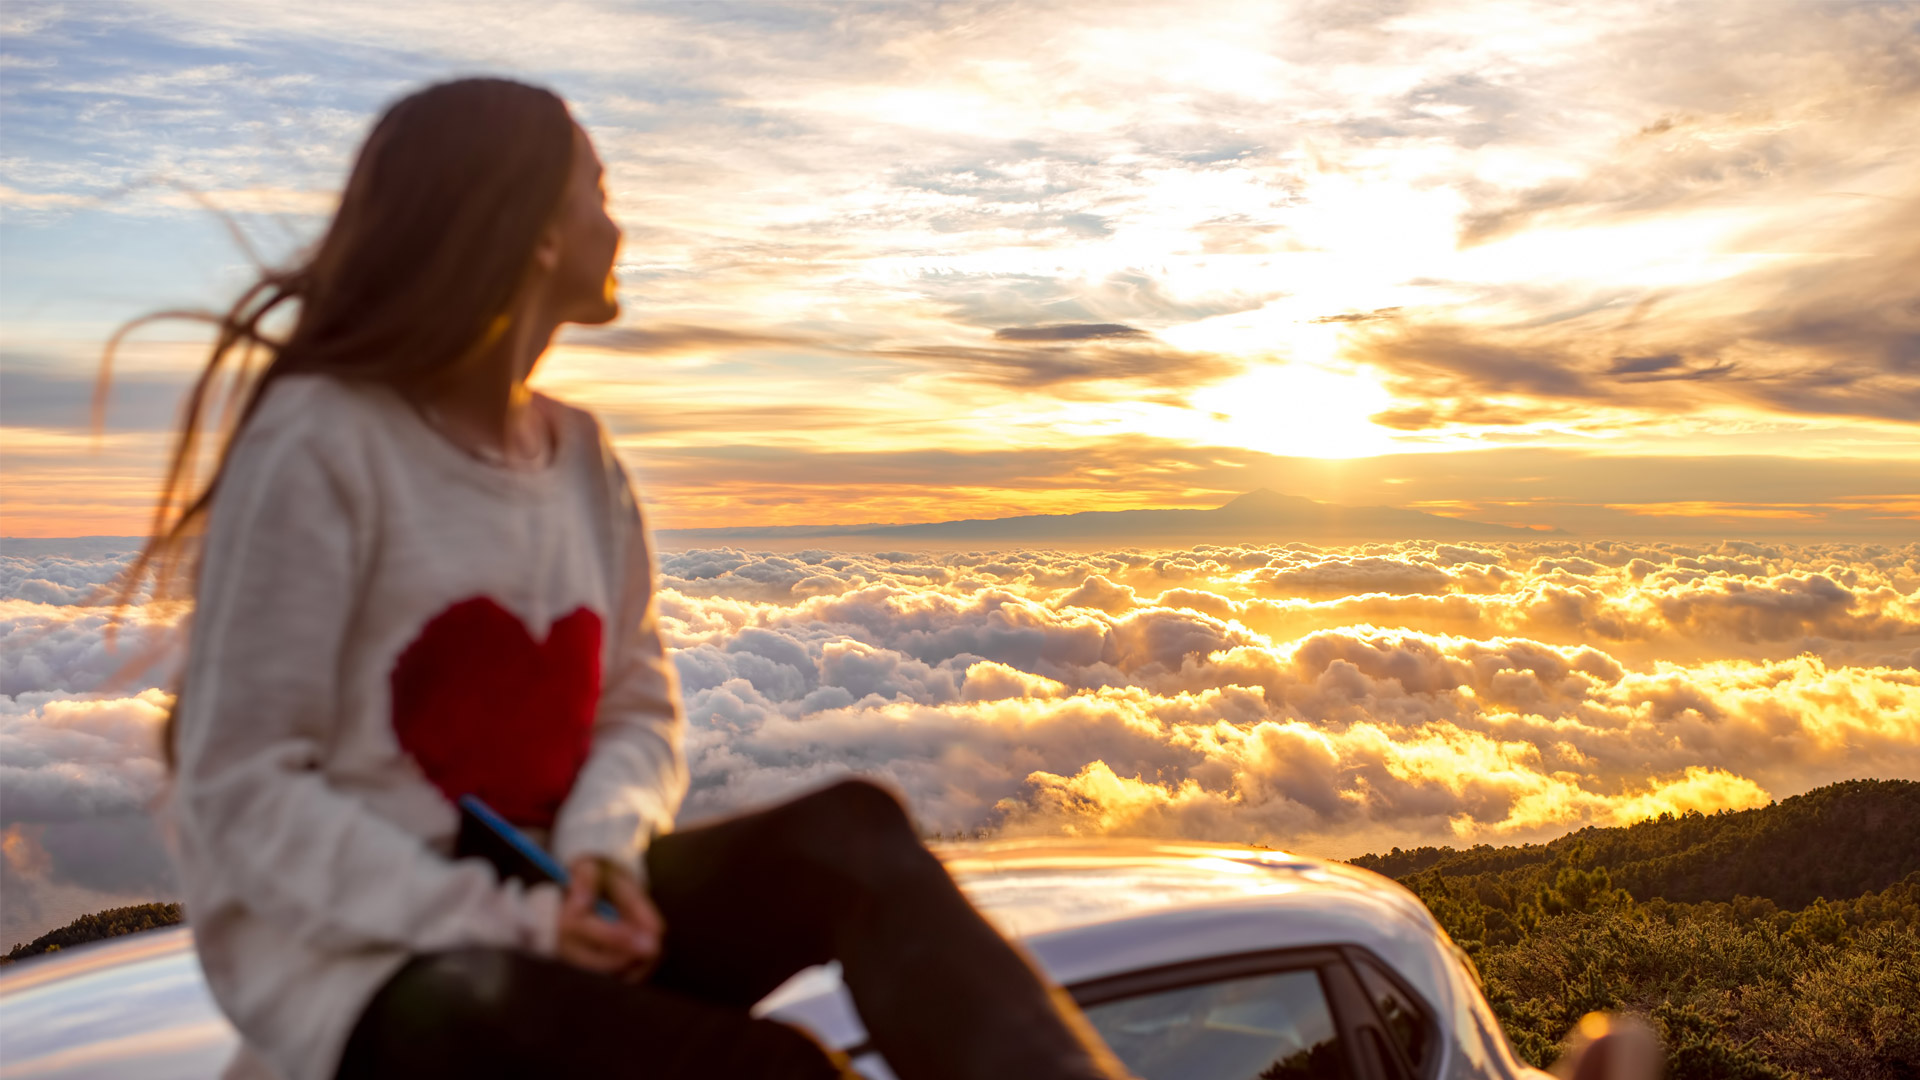 A young woman looking out over a scenic vista after driving her car up a mountain